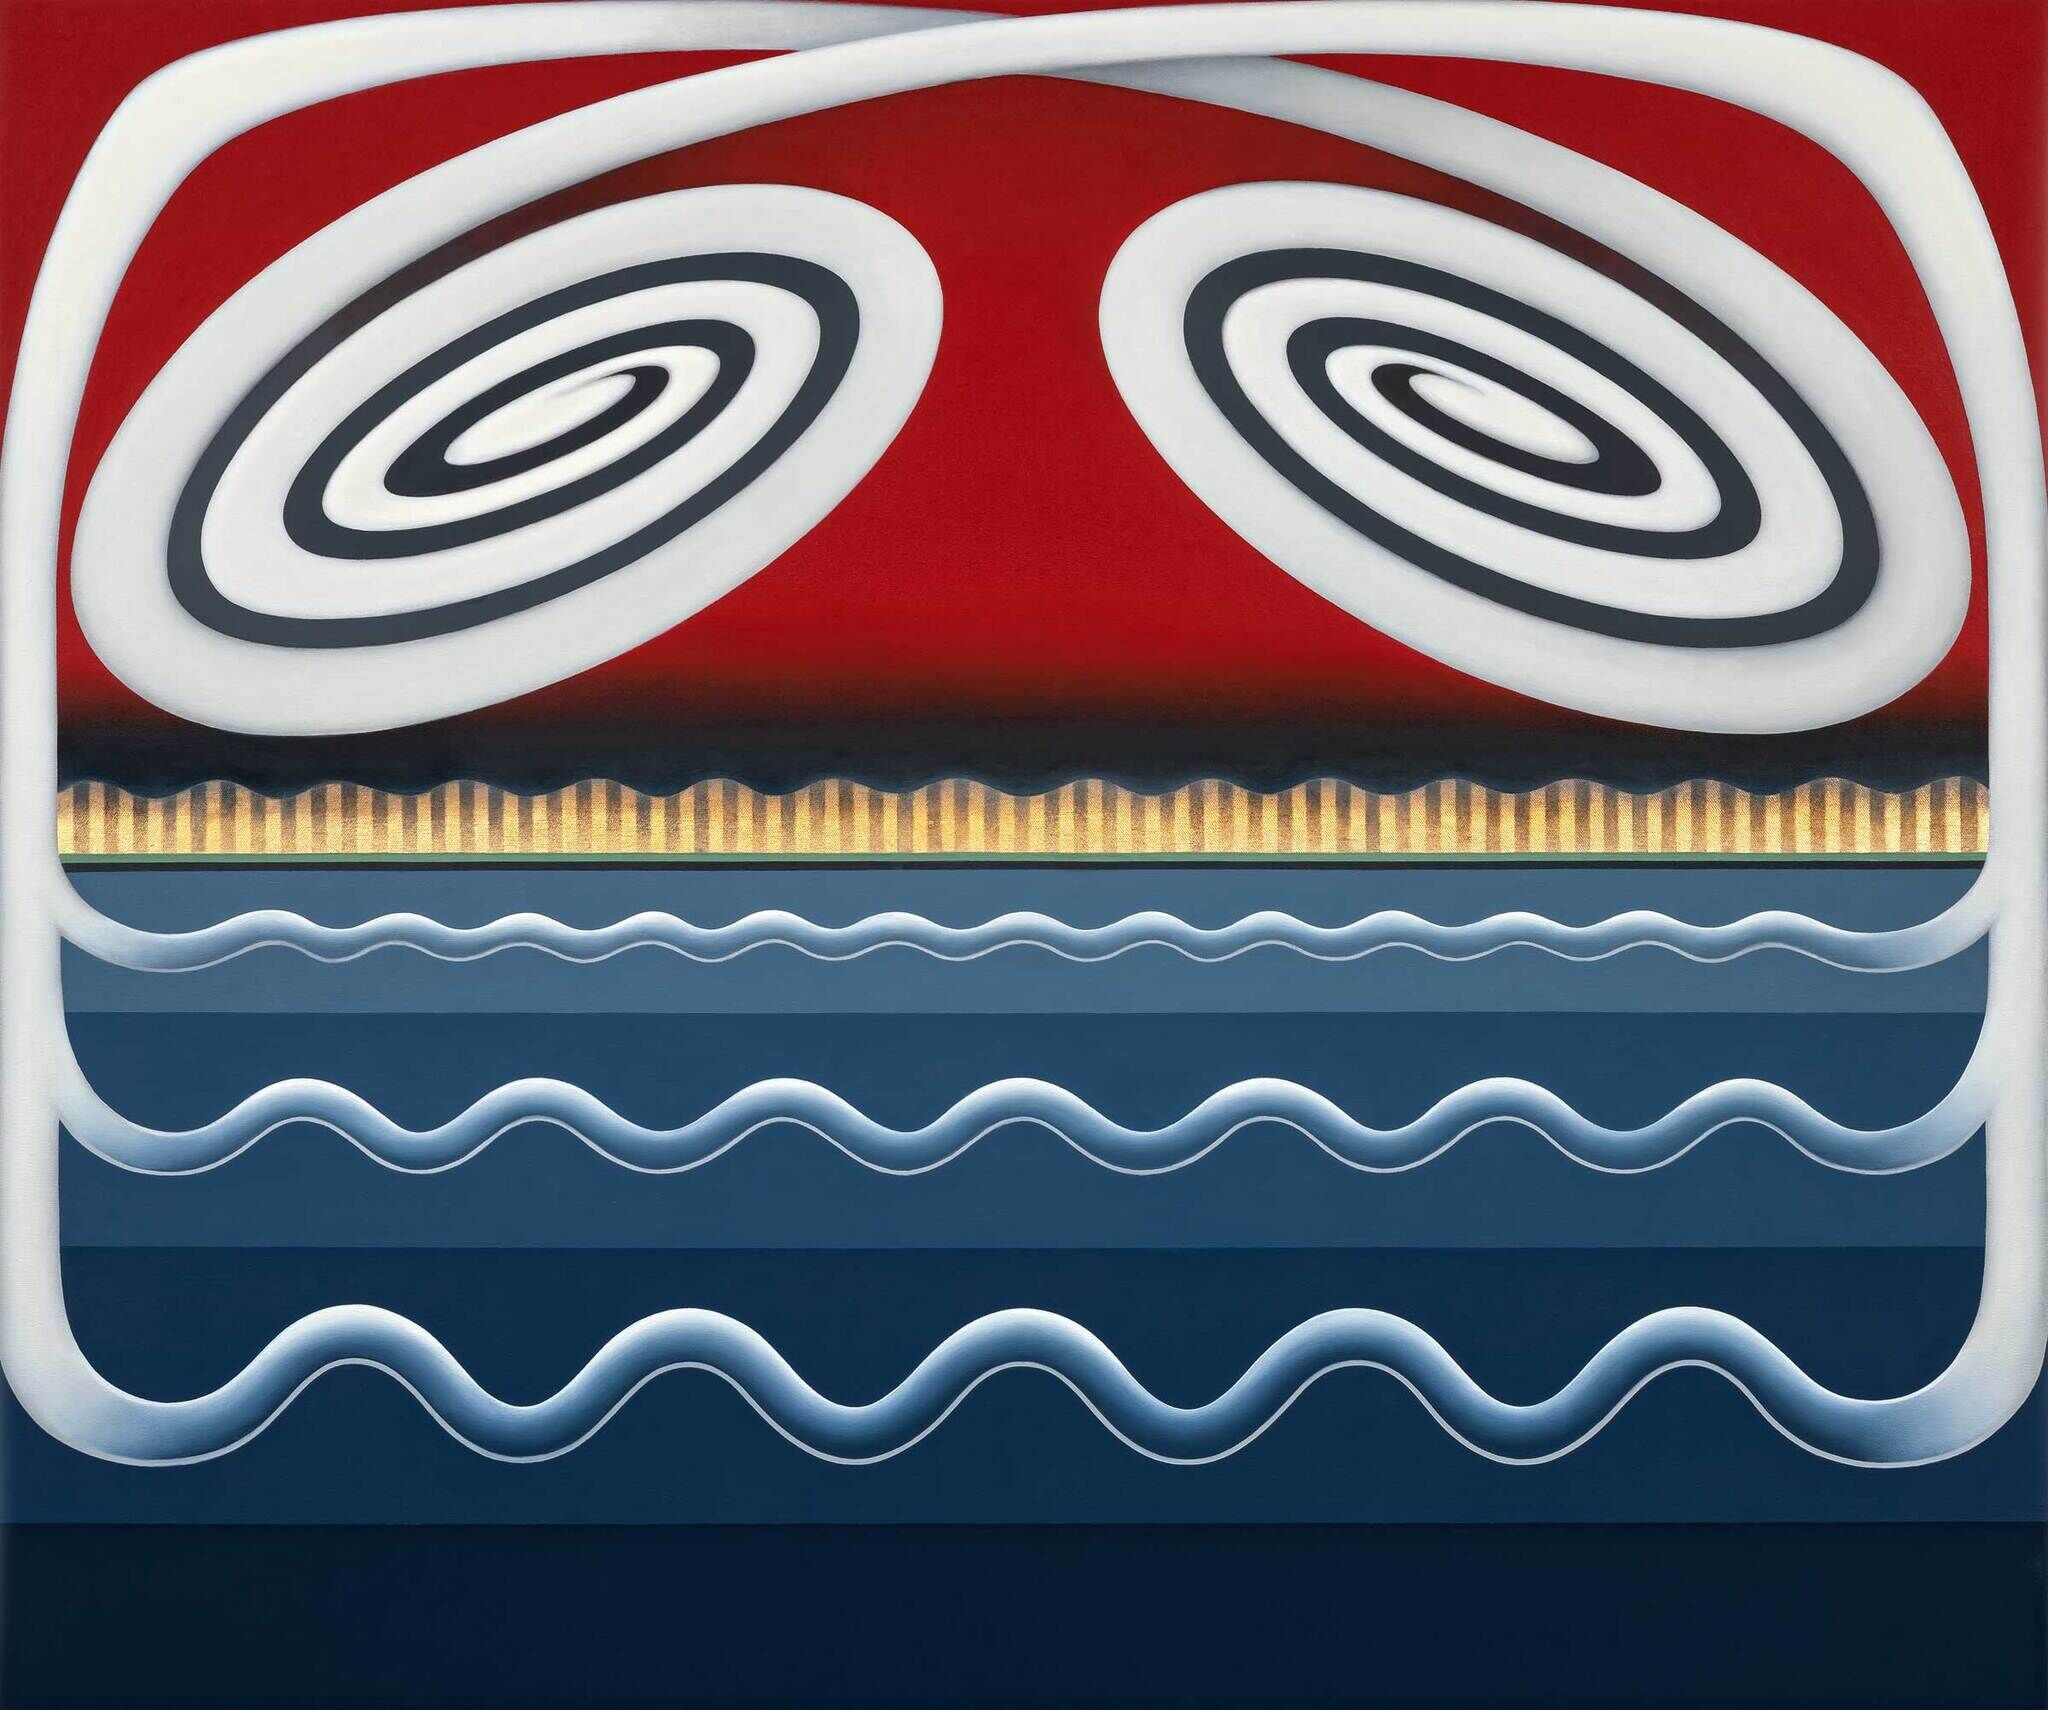 Abstract artwork with concentric circles, red background, wavy lines, and sandy texture.